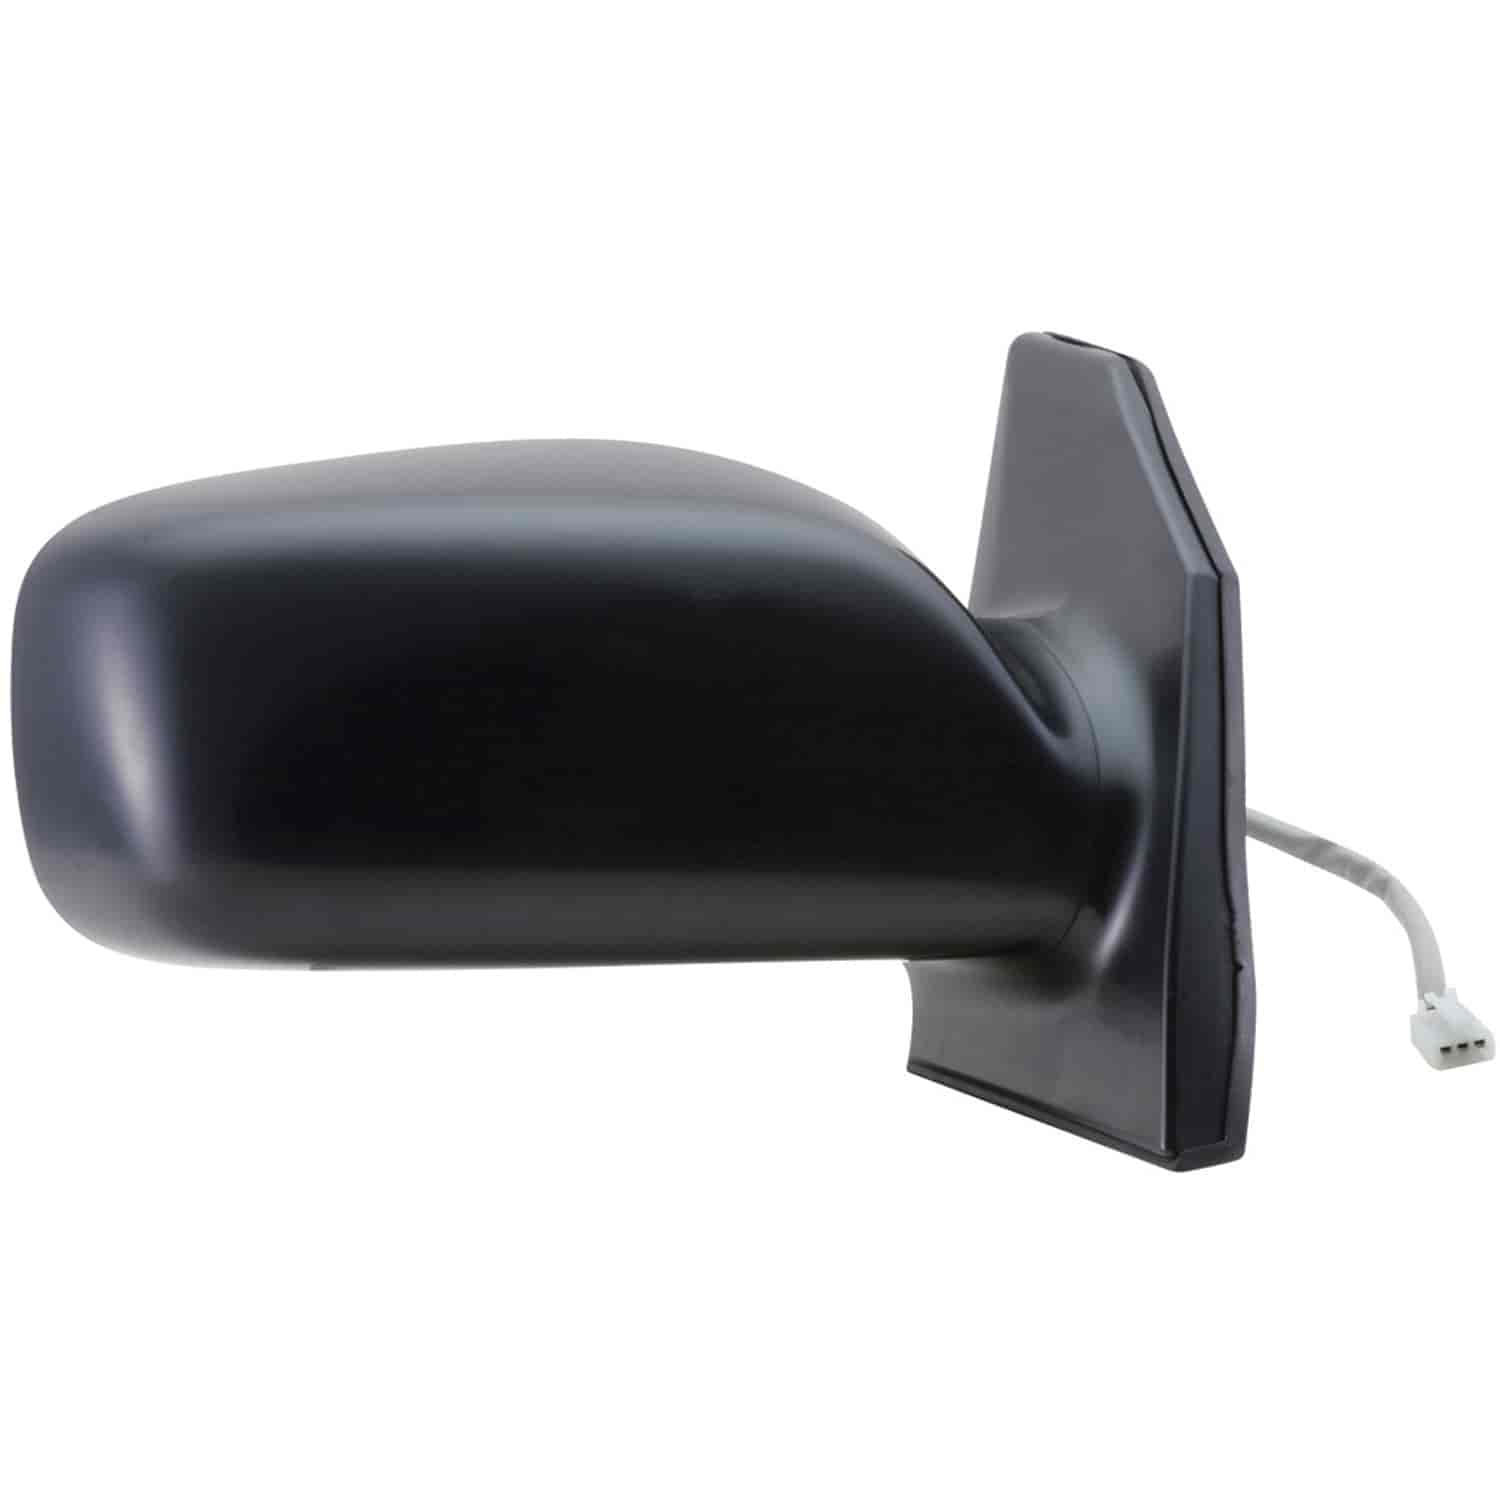 OEM Style Replacement mirror for 03-06 Toyota Corolla CE model passenger side mirror tested to fit a